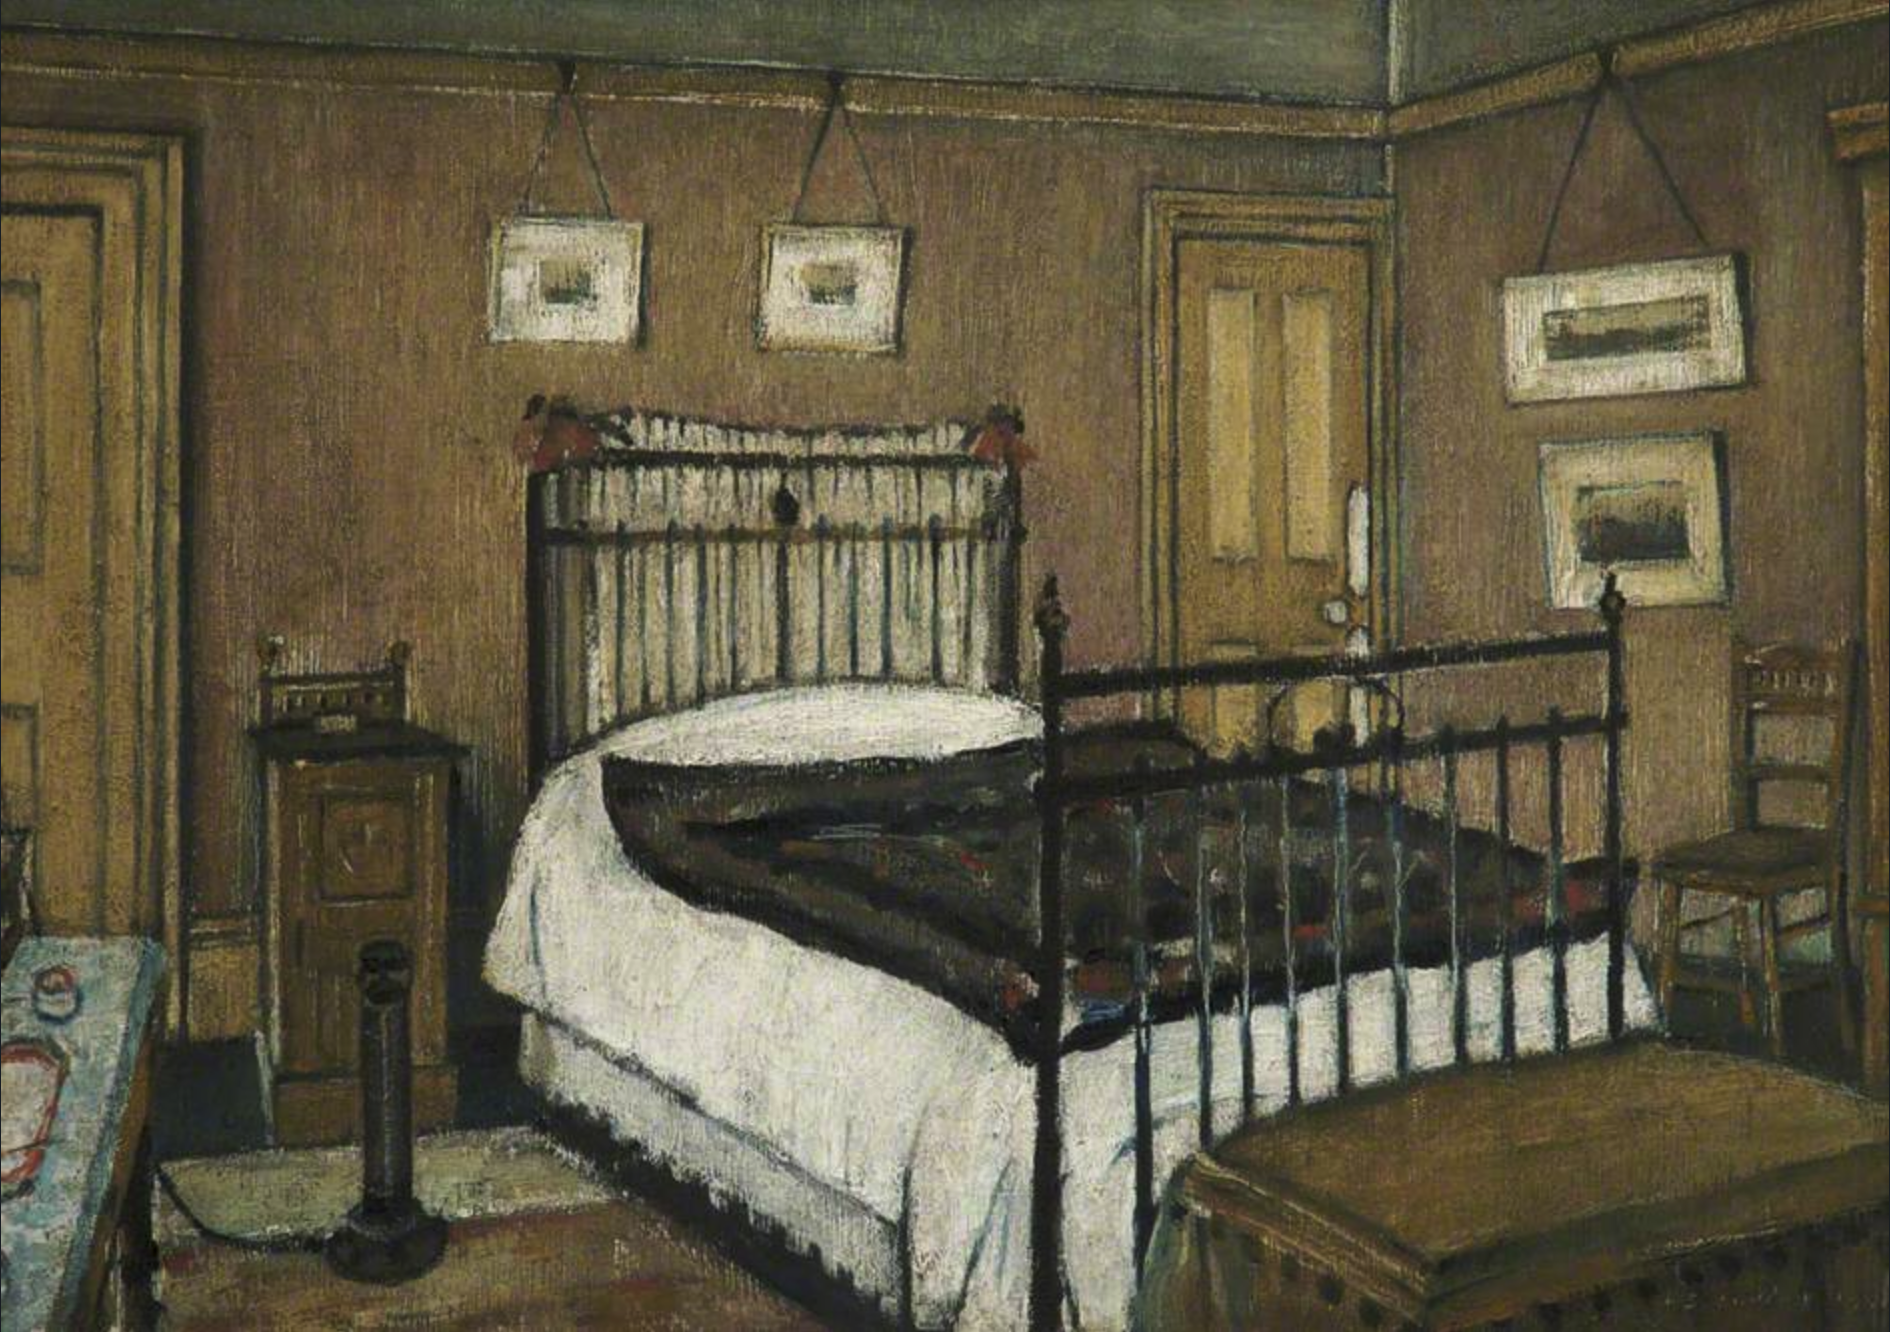 The Bedroom, Pendlebury (1940) by Laurence Stephen Lowry (1887 - 1976), English artist.